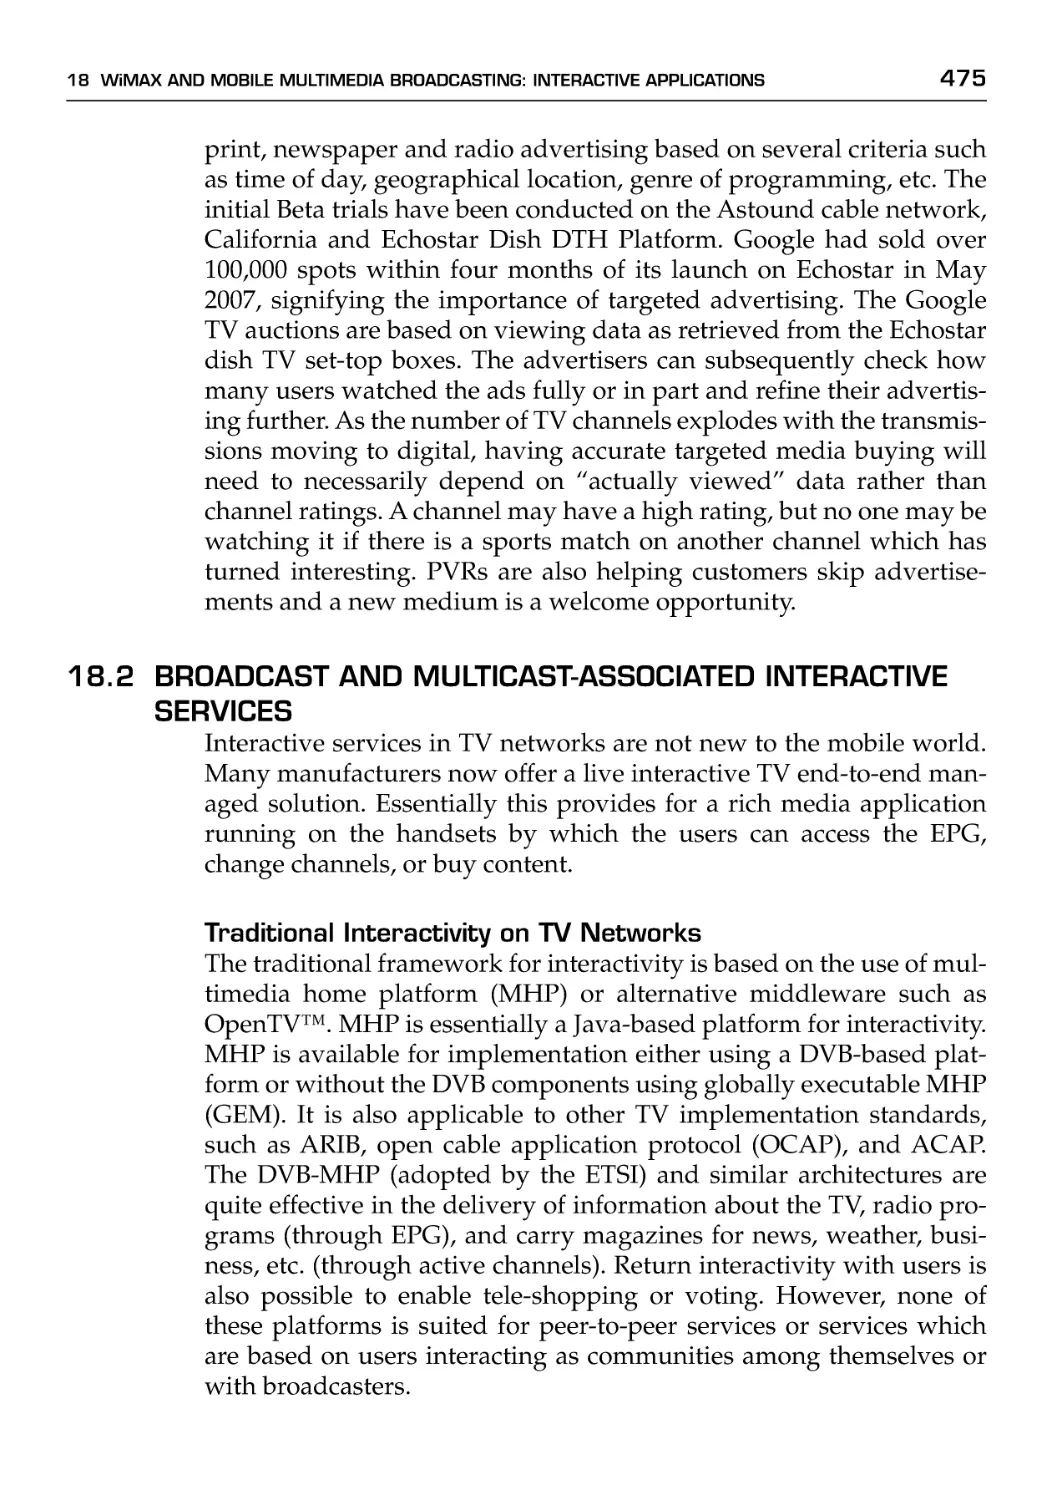 18.2 Broadcast and Multicast-Associated Interactive Services